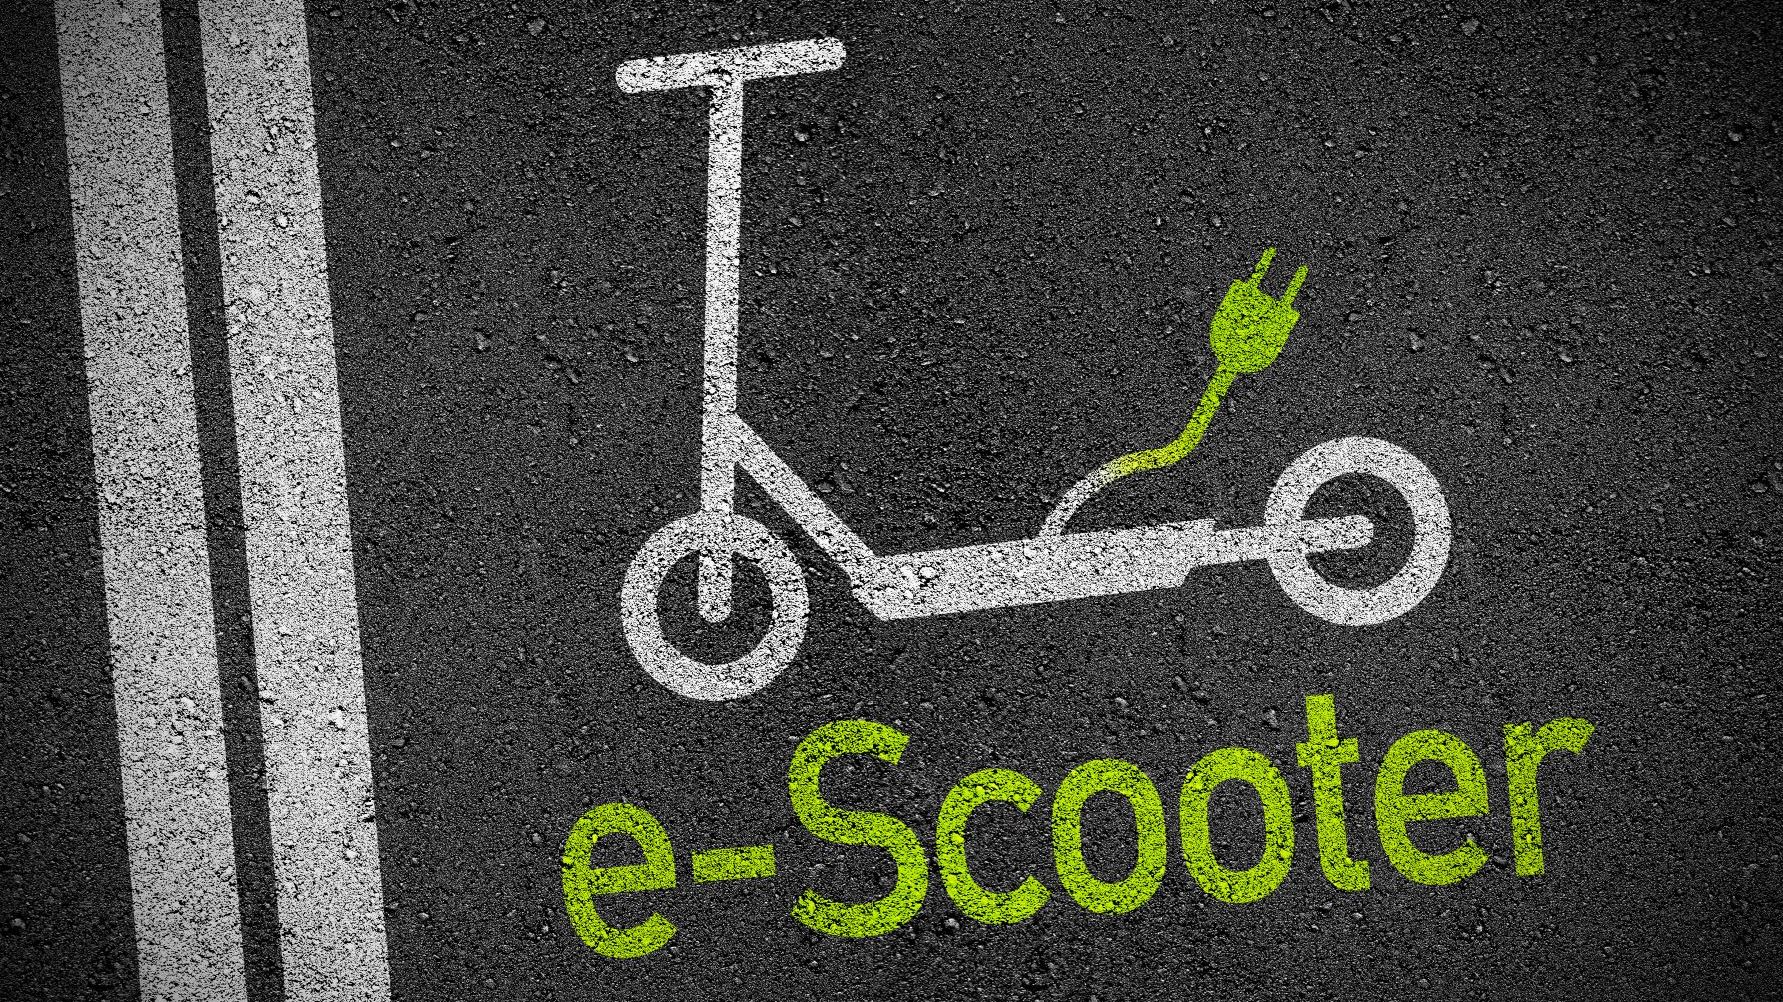 Image of an e-scooter sign